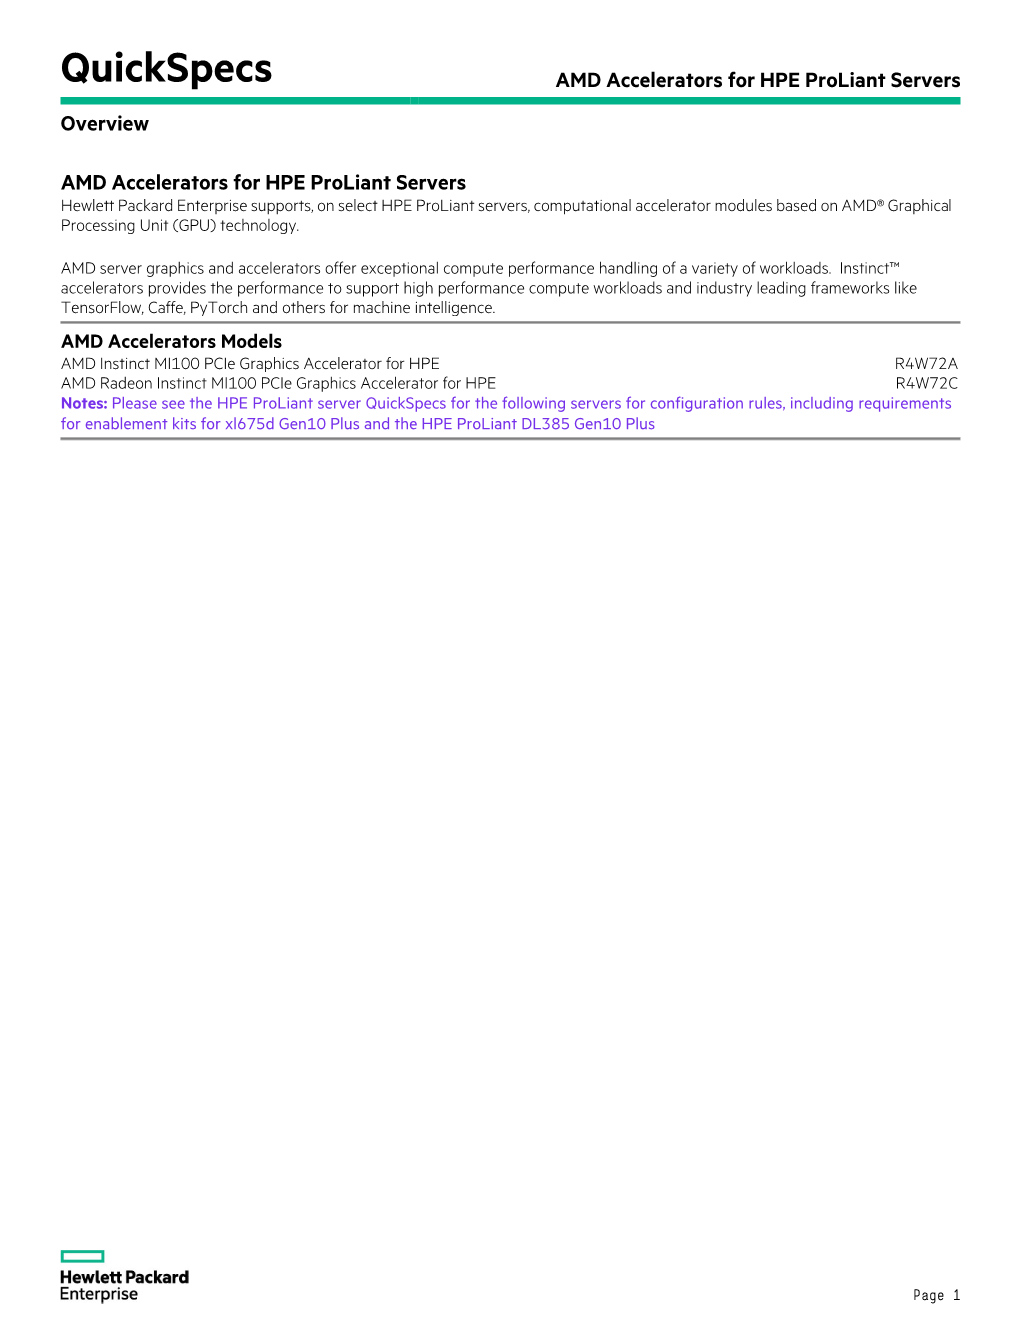 AMD Accelerators for HPE Proliant Servers Overview